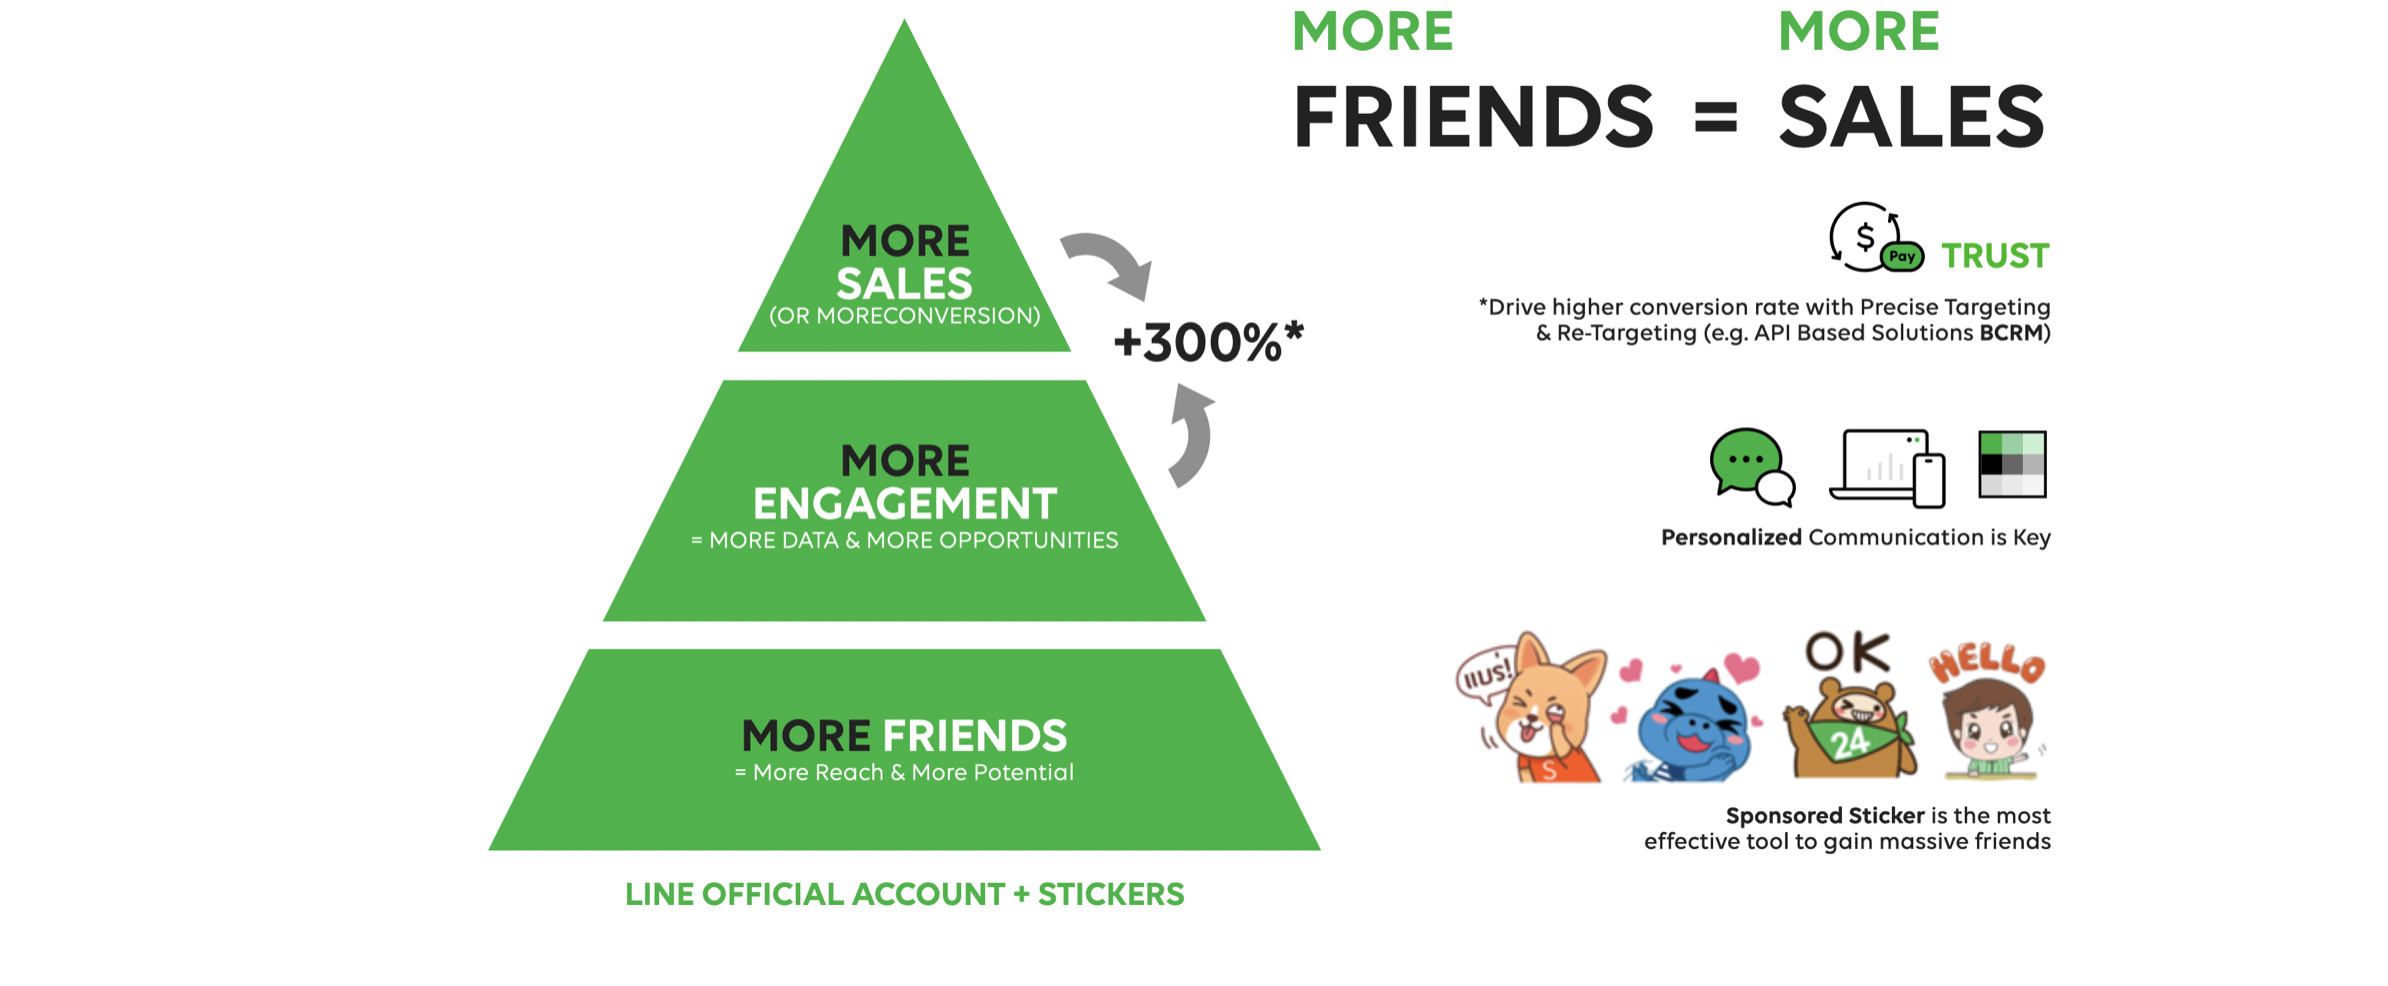 LINE stickers increase friends for leads, engagement, and sales